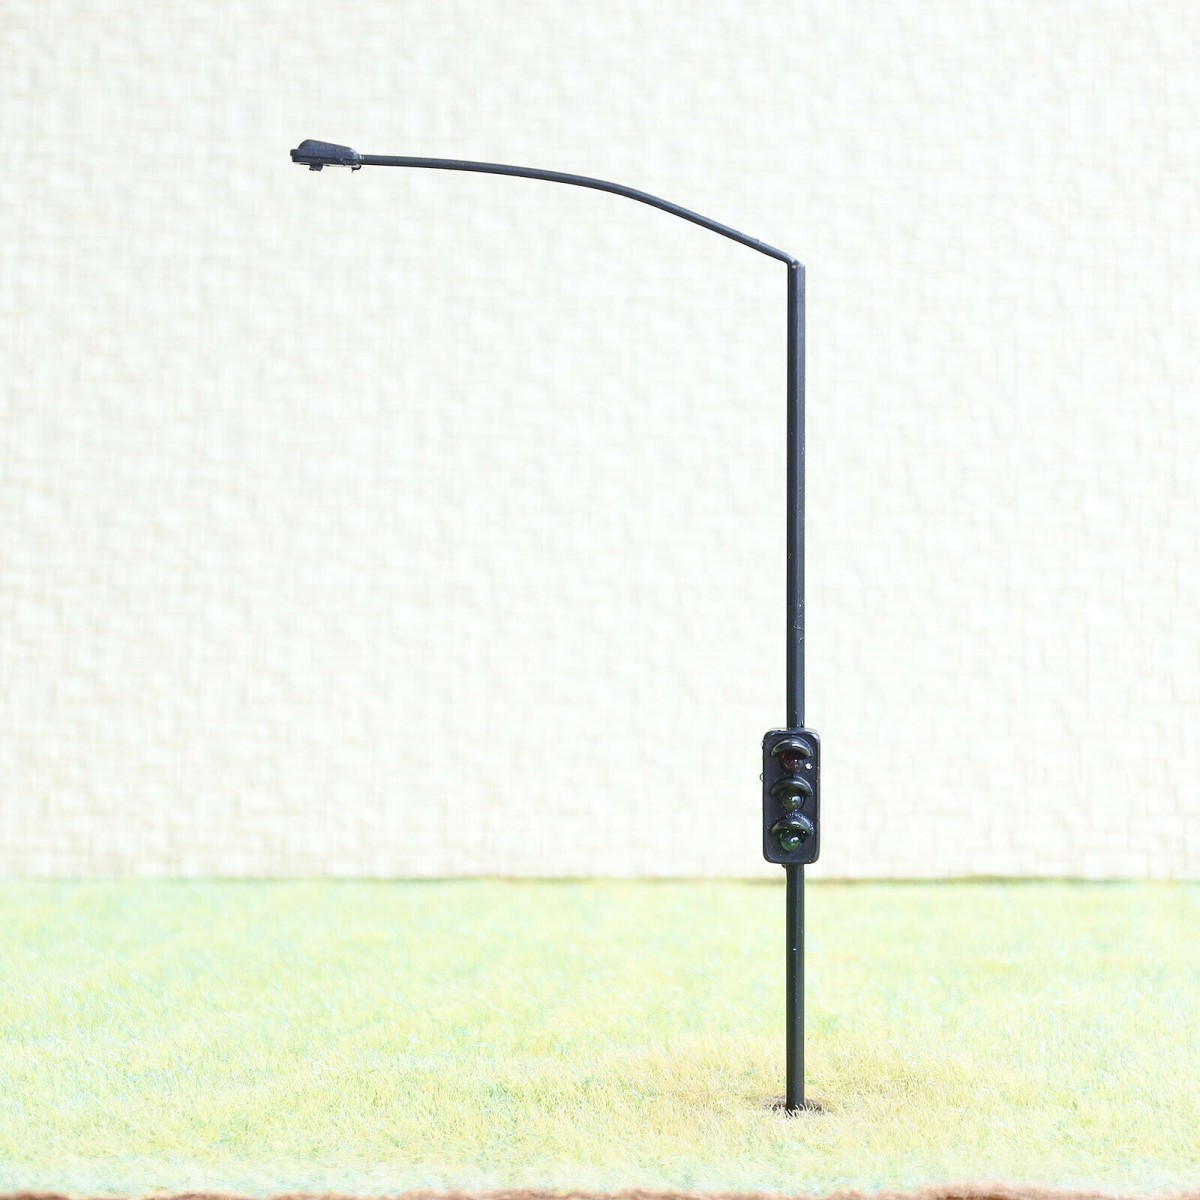 1 x traffic signal with street light HO OO scale model railroad led lamps #corBB